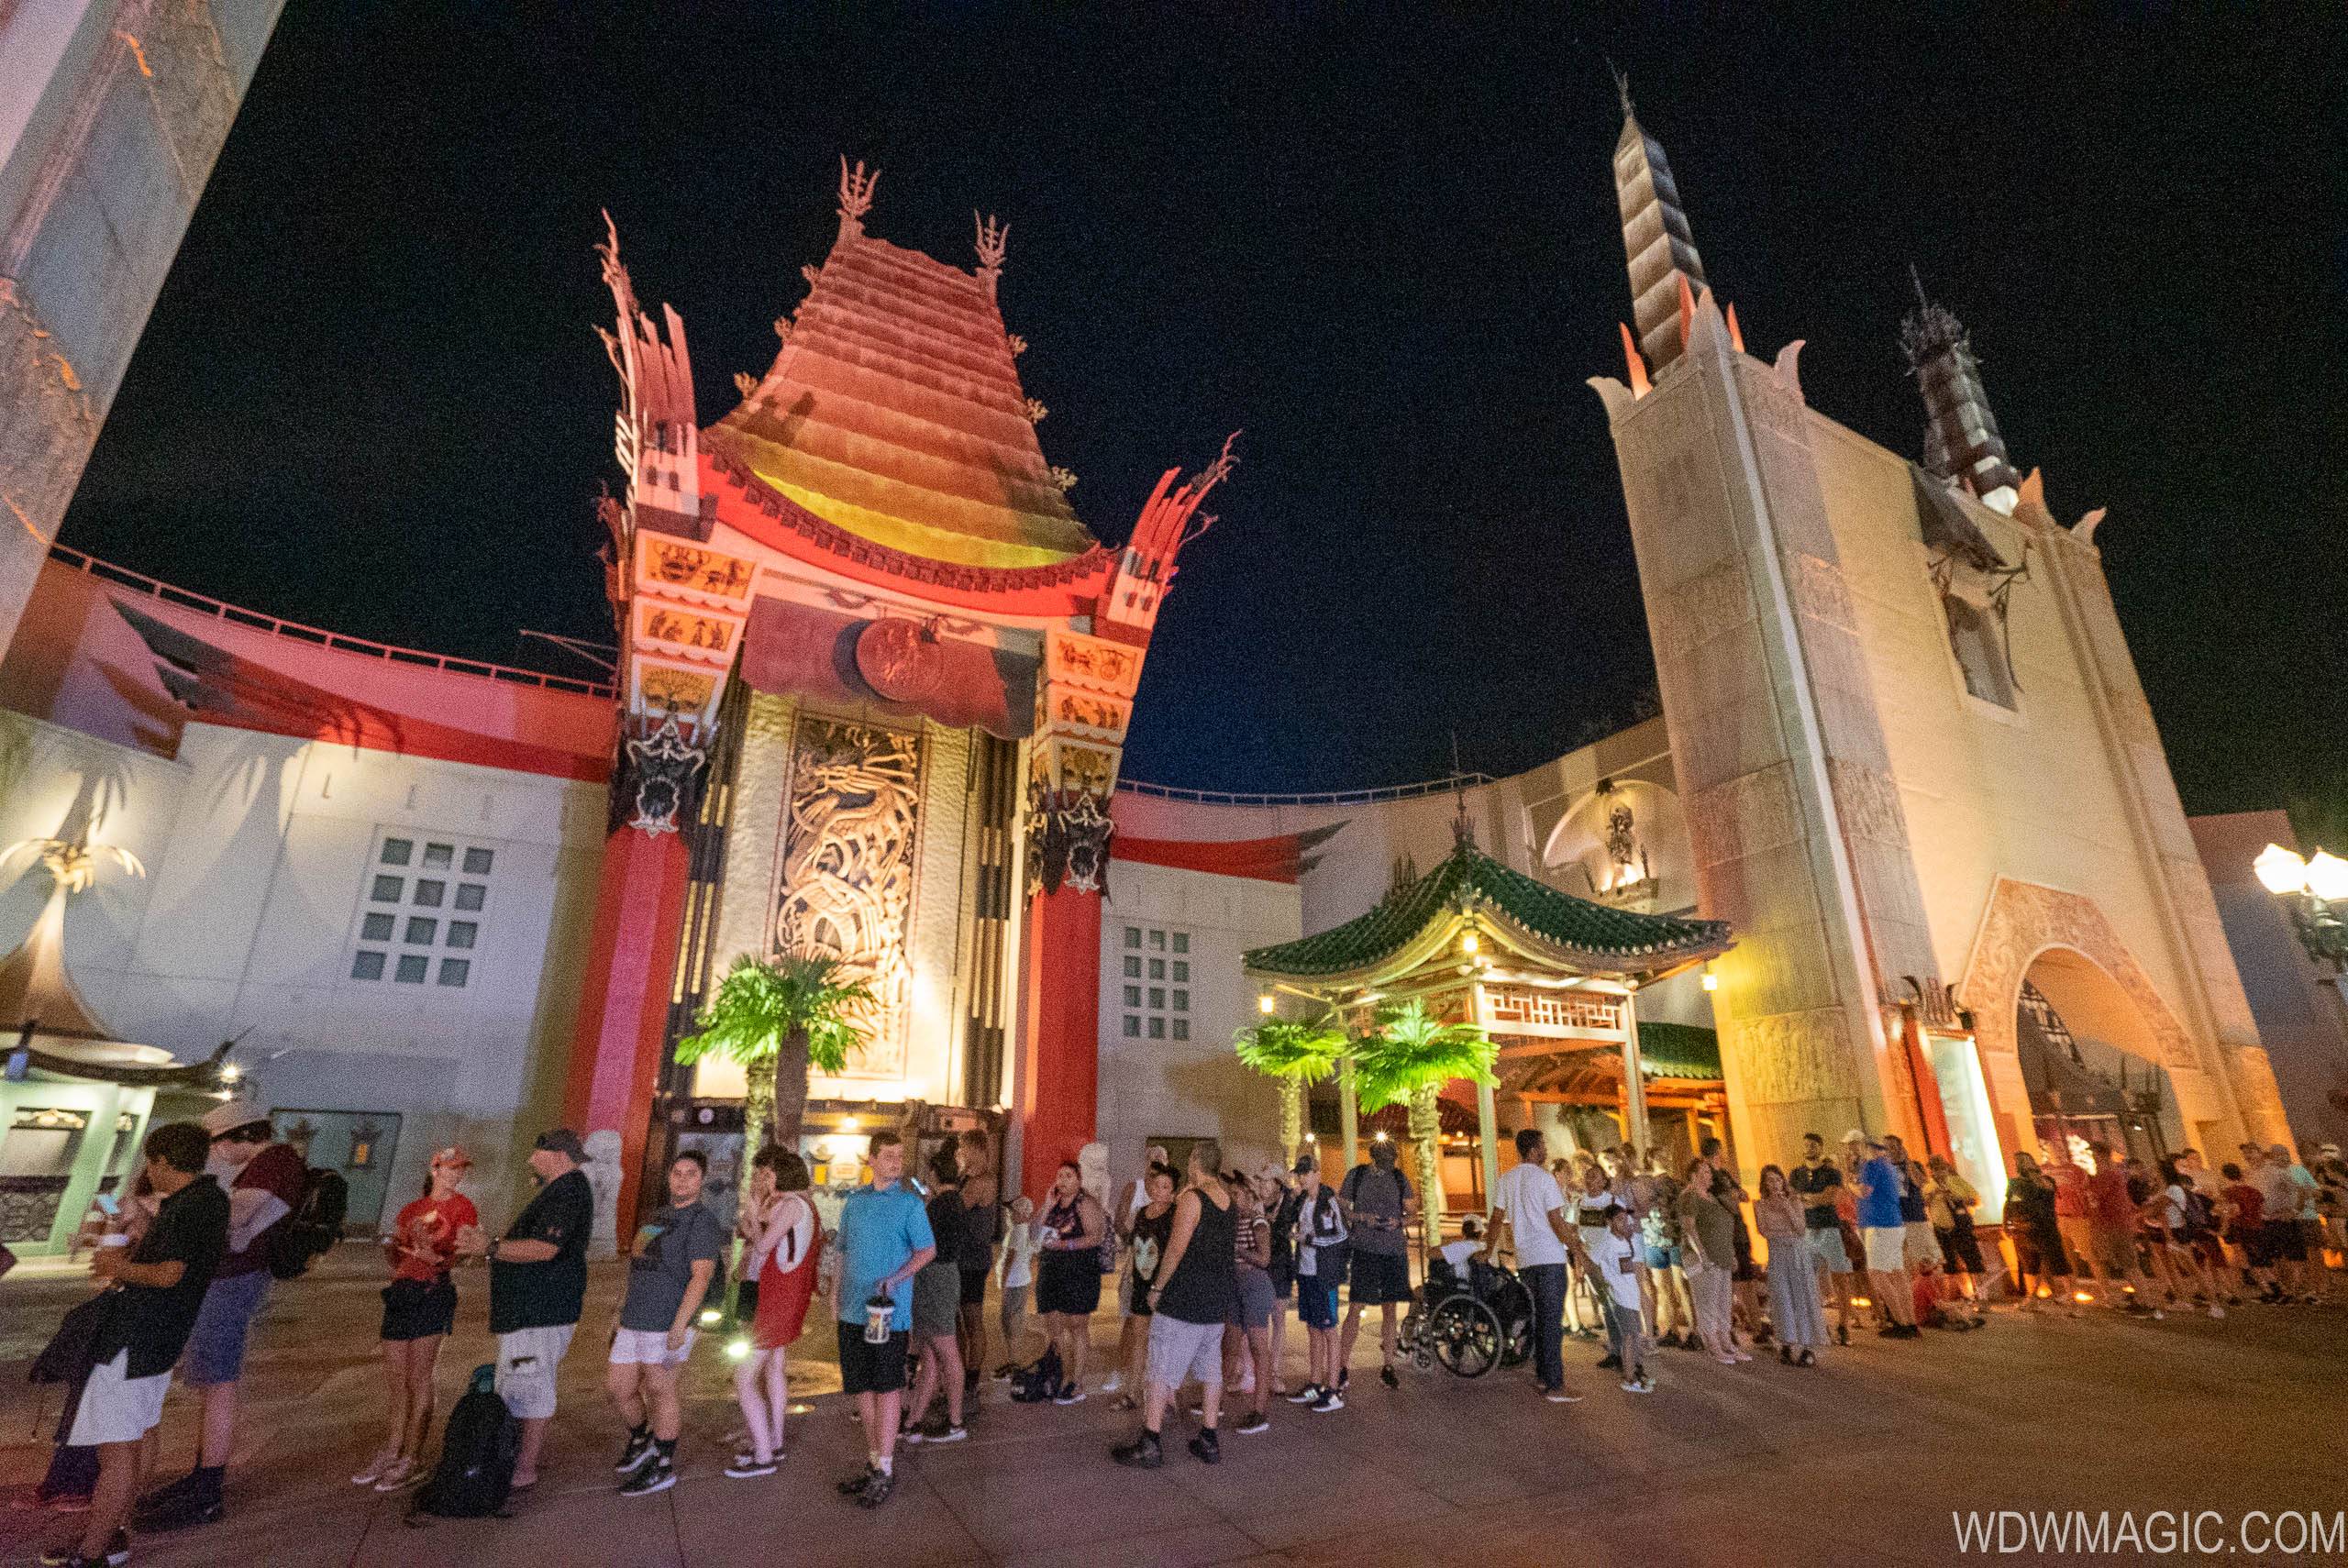 Star Wars Galaxy's Edge opening day crowds at Disney's Hollywood Studios